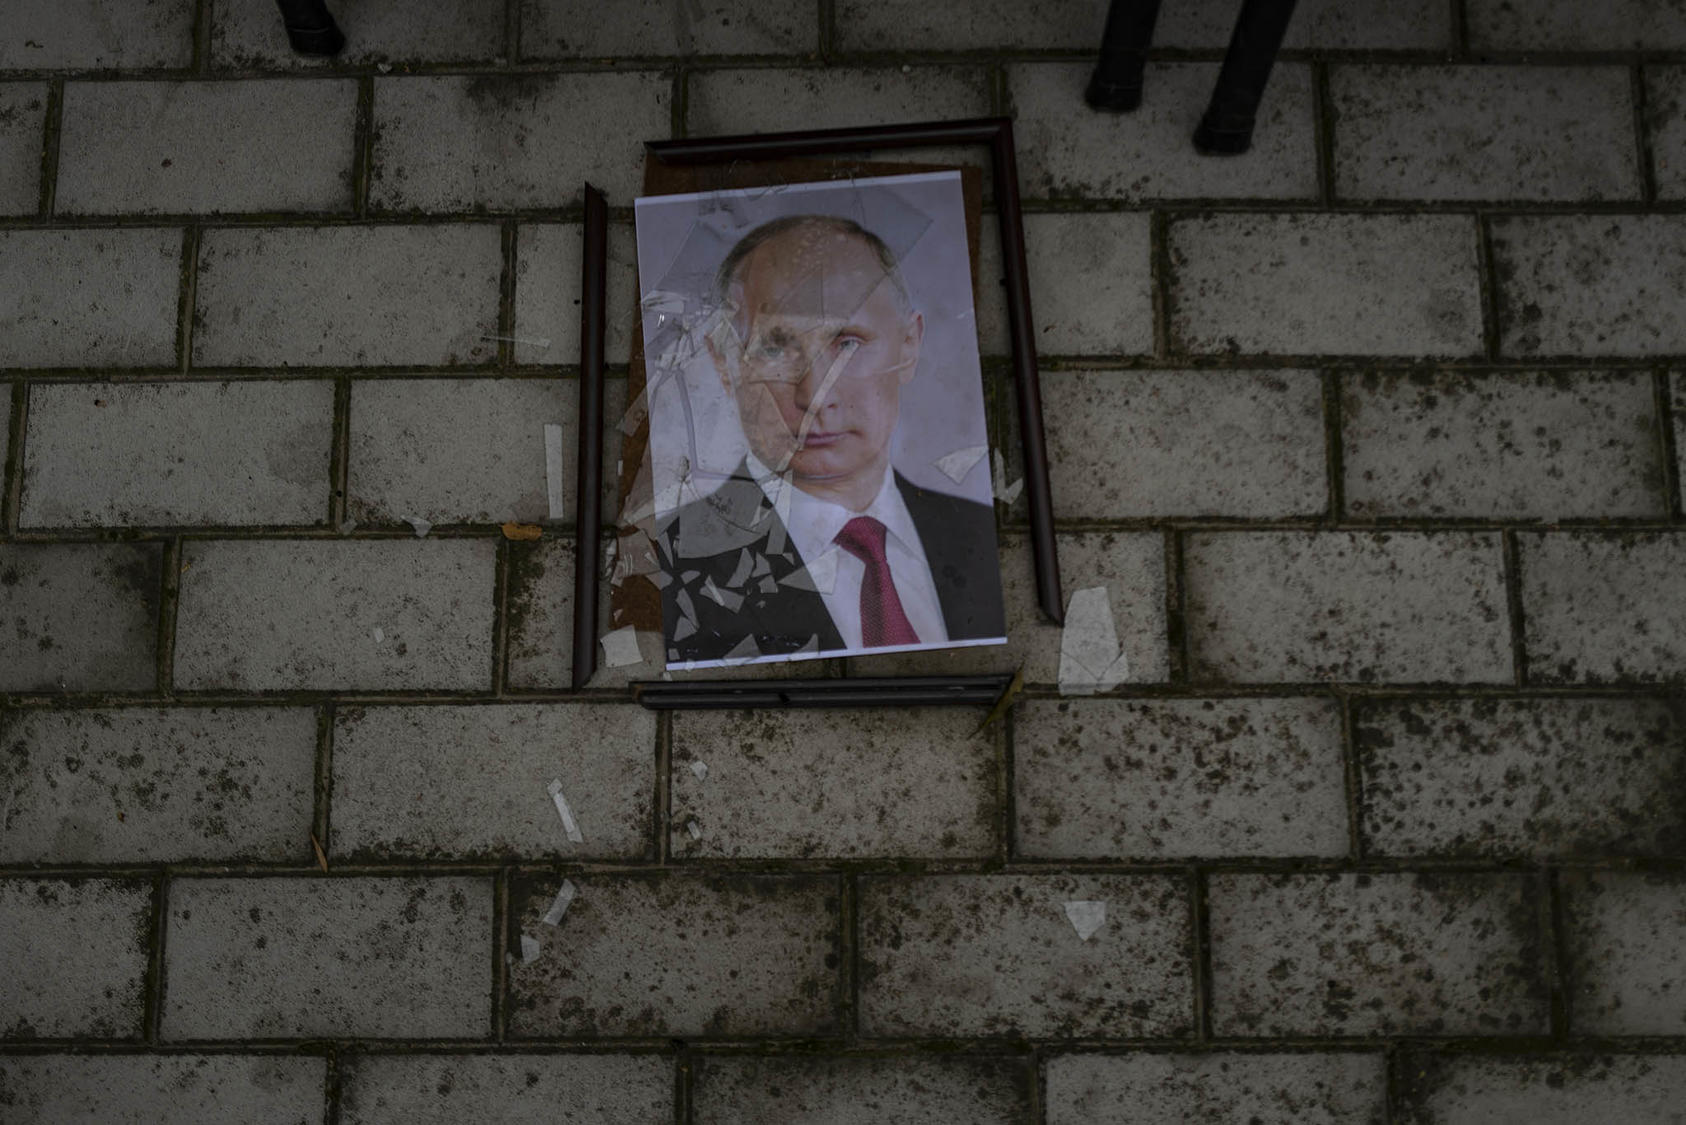 A smashed portrait of Russian President Vladimir Putin lies outside a police prison used to hold and torture Ukrainian prisoners by Russian forces in Kherson, Ukraine on Nov. 17, 2022. (Lynsey Addario/The New York Times)